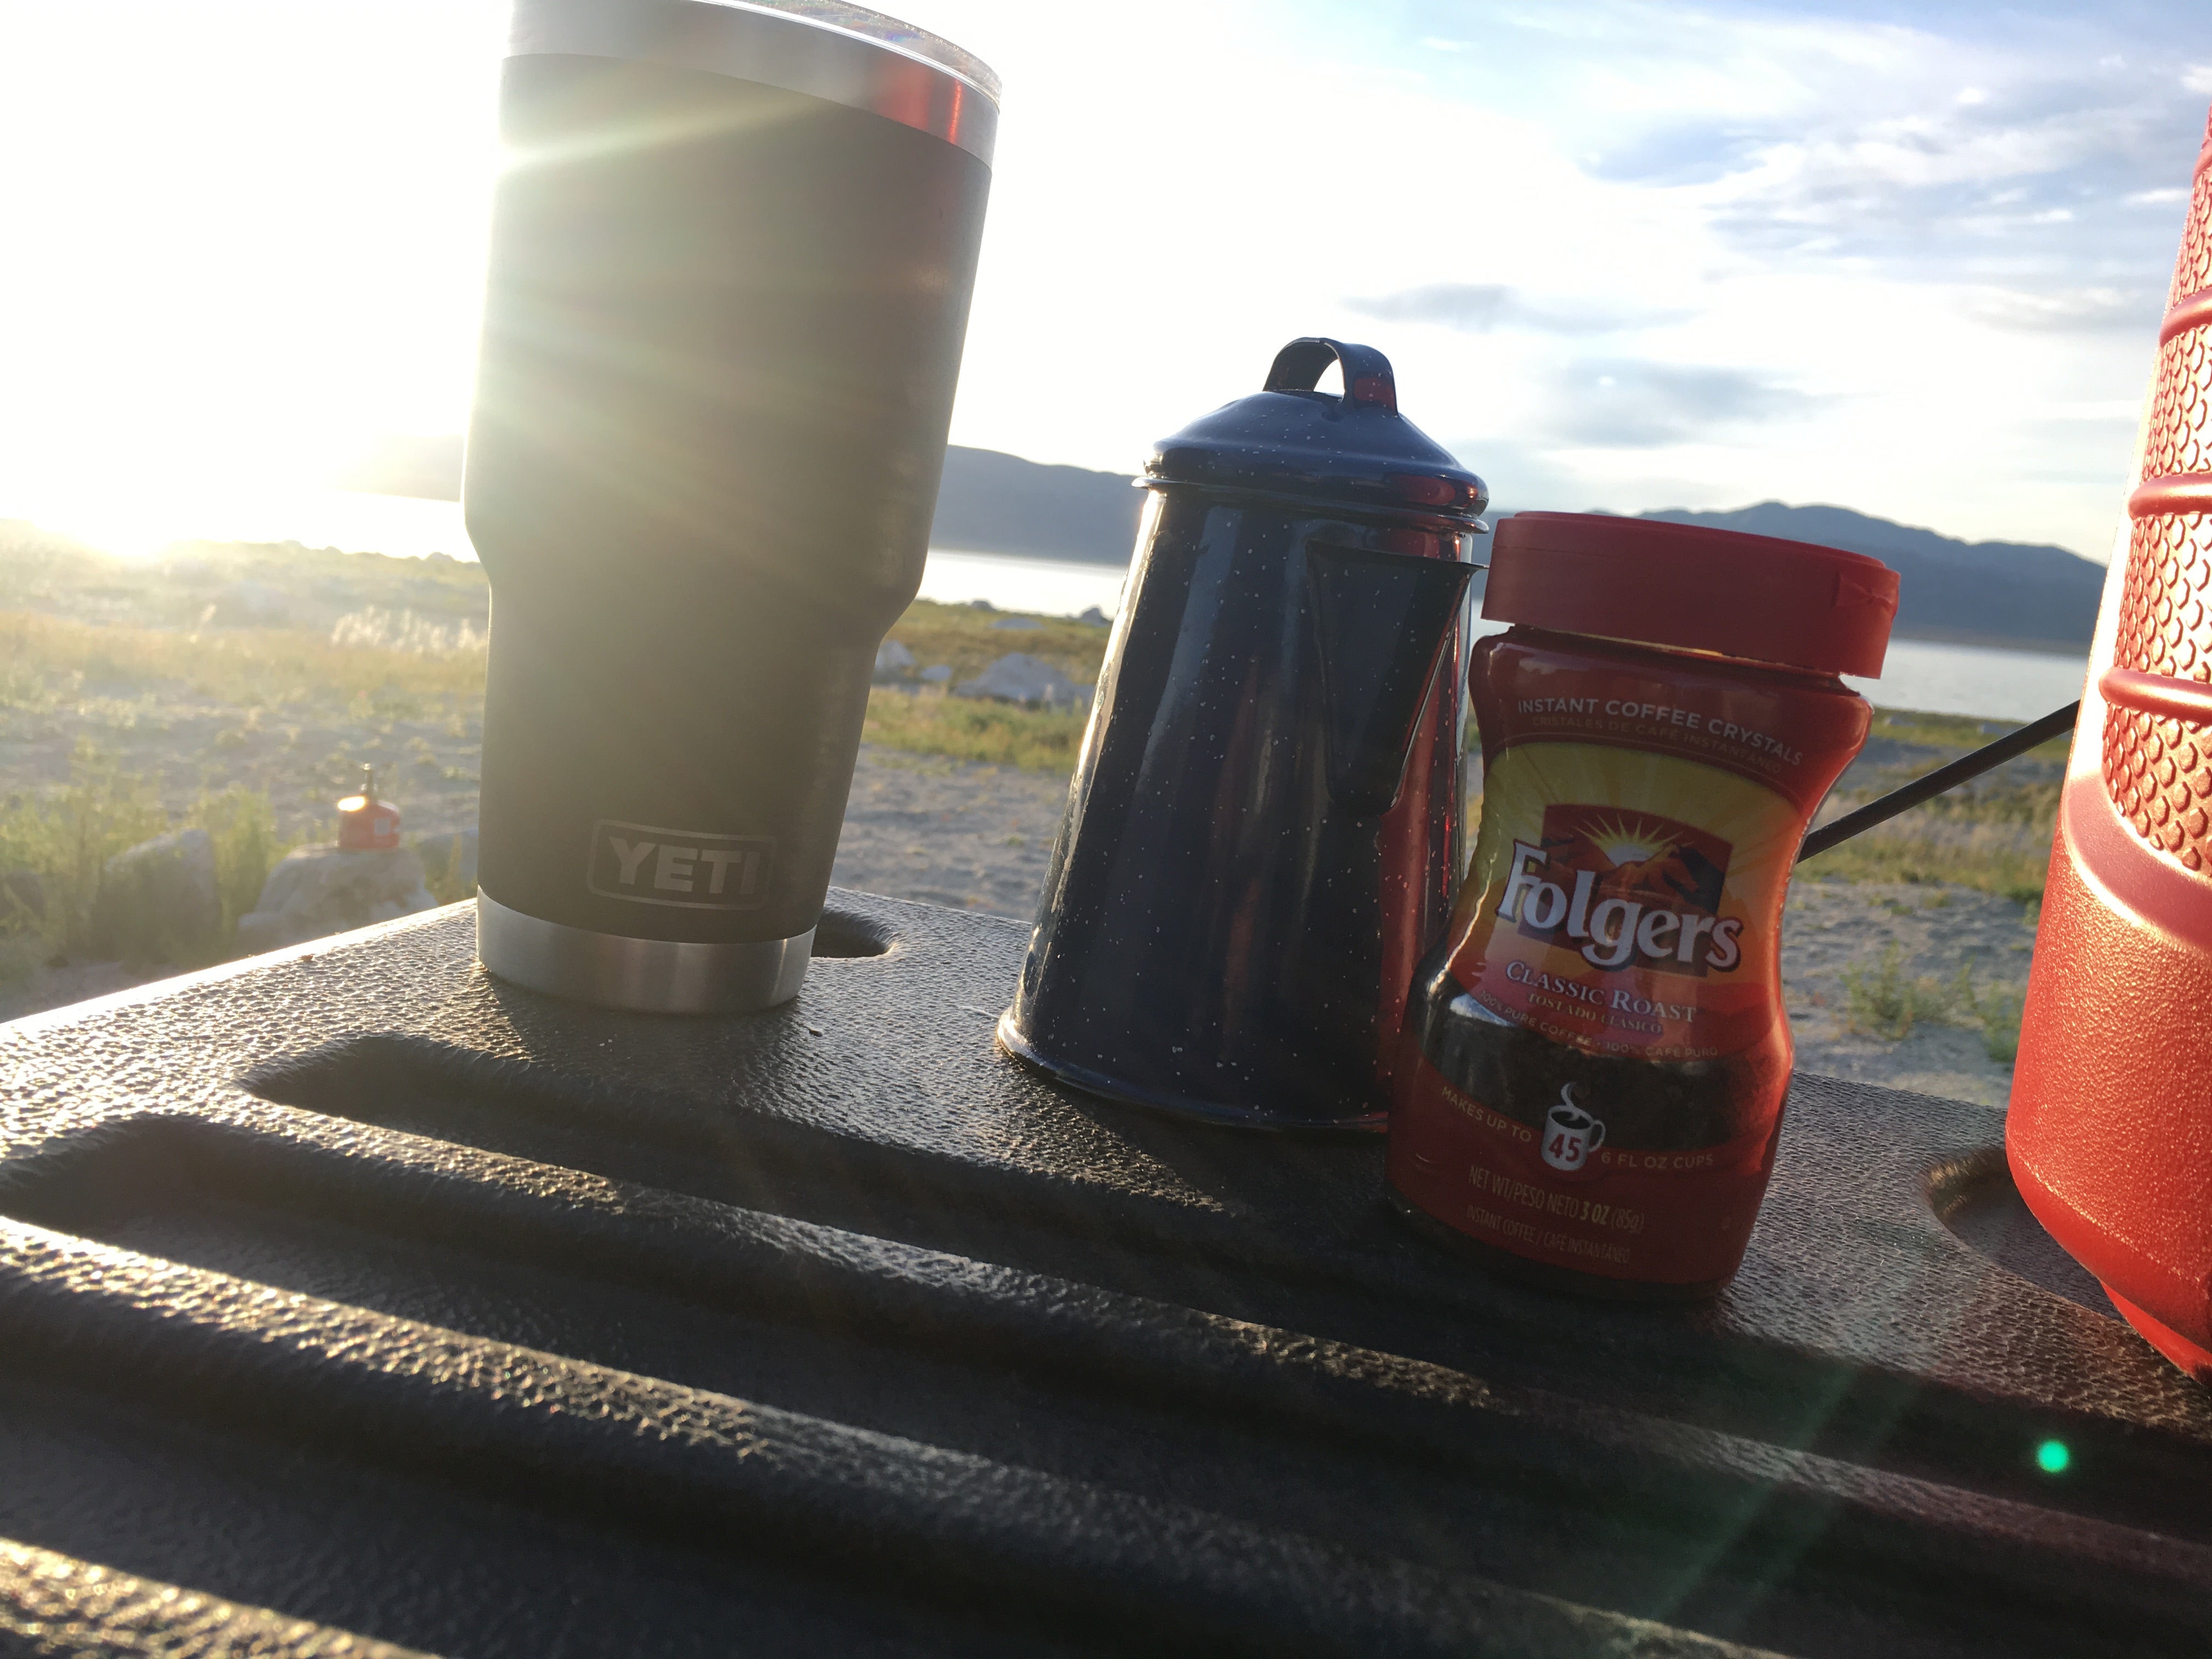 Nothing like camp coffee...